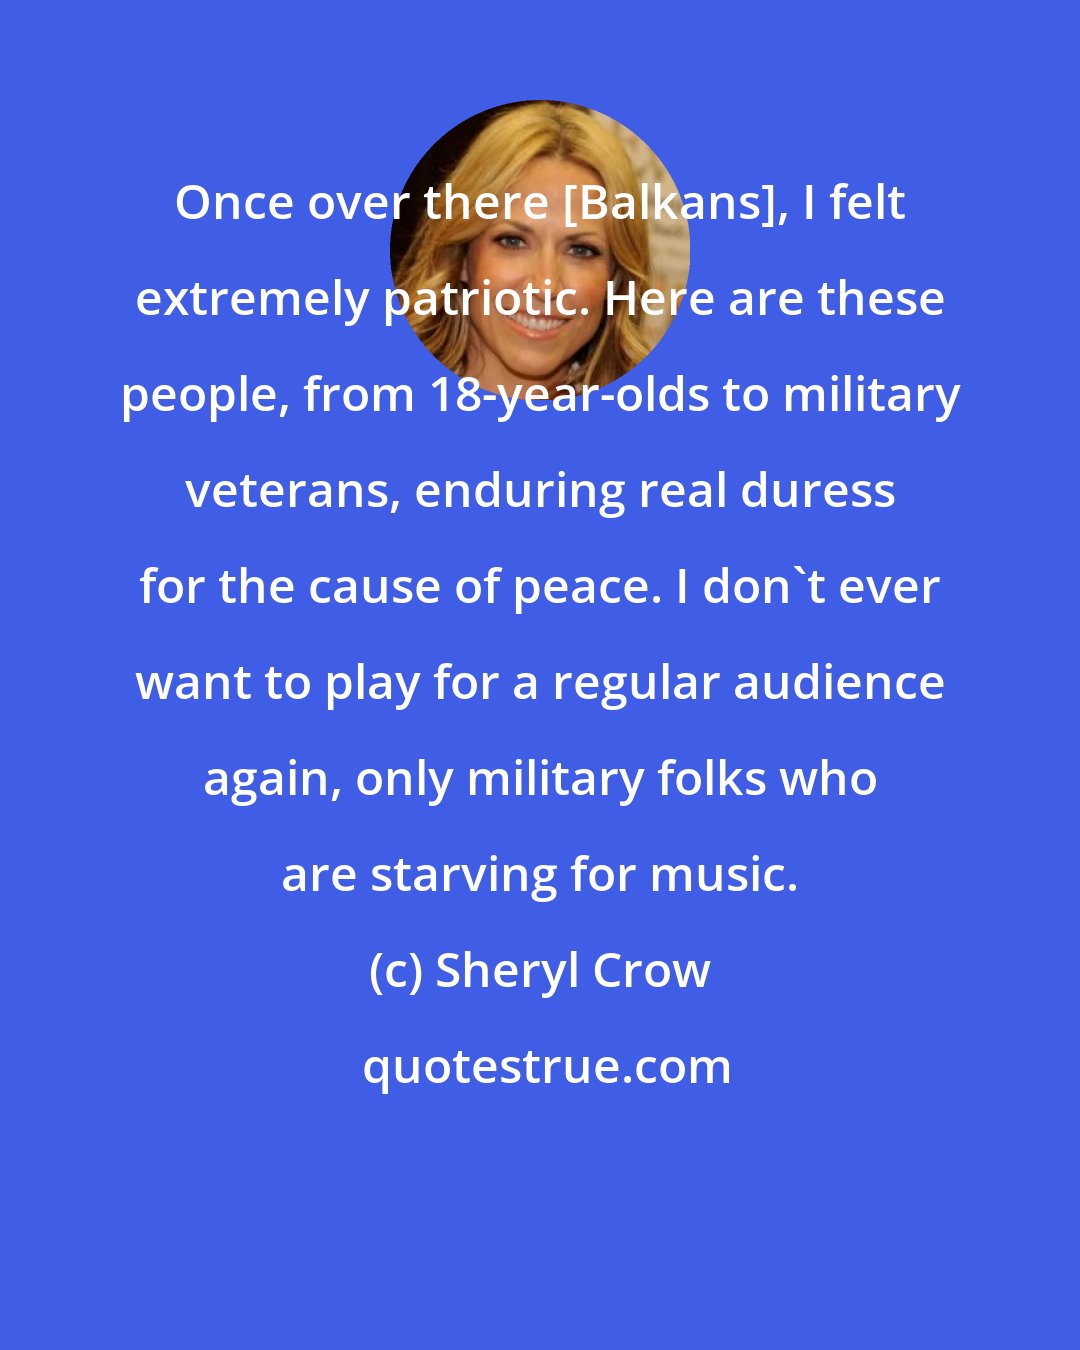 Sheryl Crow: Once over there [Balkans], I felt extremely patriotic. Here are these people, from 18-year-olds to military veterans, enduring real duress for the cause of peace. I don't ever want to play for a regular audience again, only military folks who are starving for music.